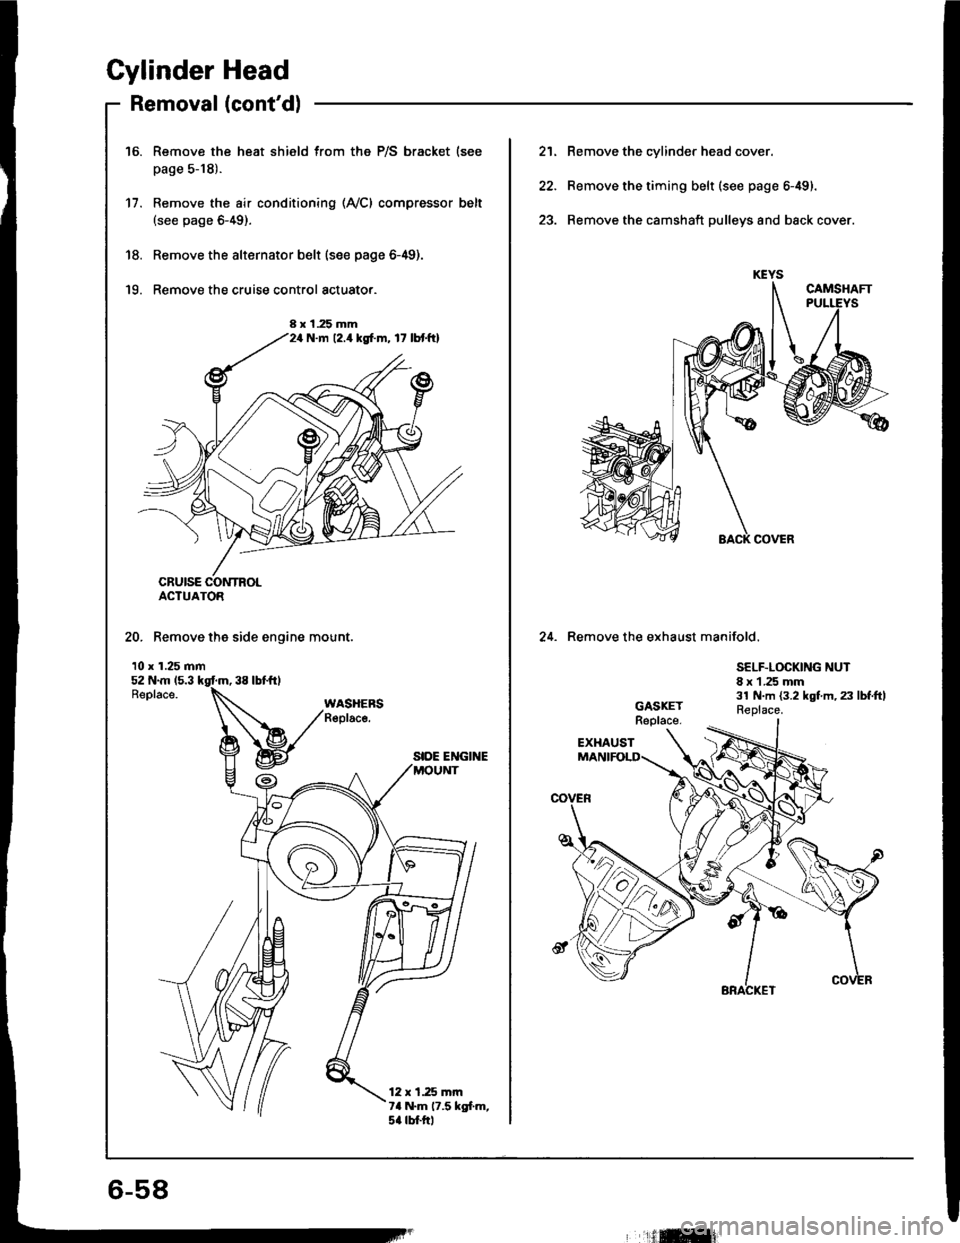 HONDA INTEGRA 1994 4.G Workshop Manual Cylinder Head
Removal (contdl
Remove the heat shield from the P/S bracket (see
page 5-18).
Remove the air conditioning (AyCl compressor belt(see page 6-49).
Remove the alternator belt {s€e page 6-